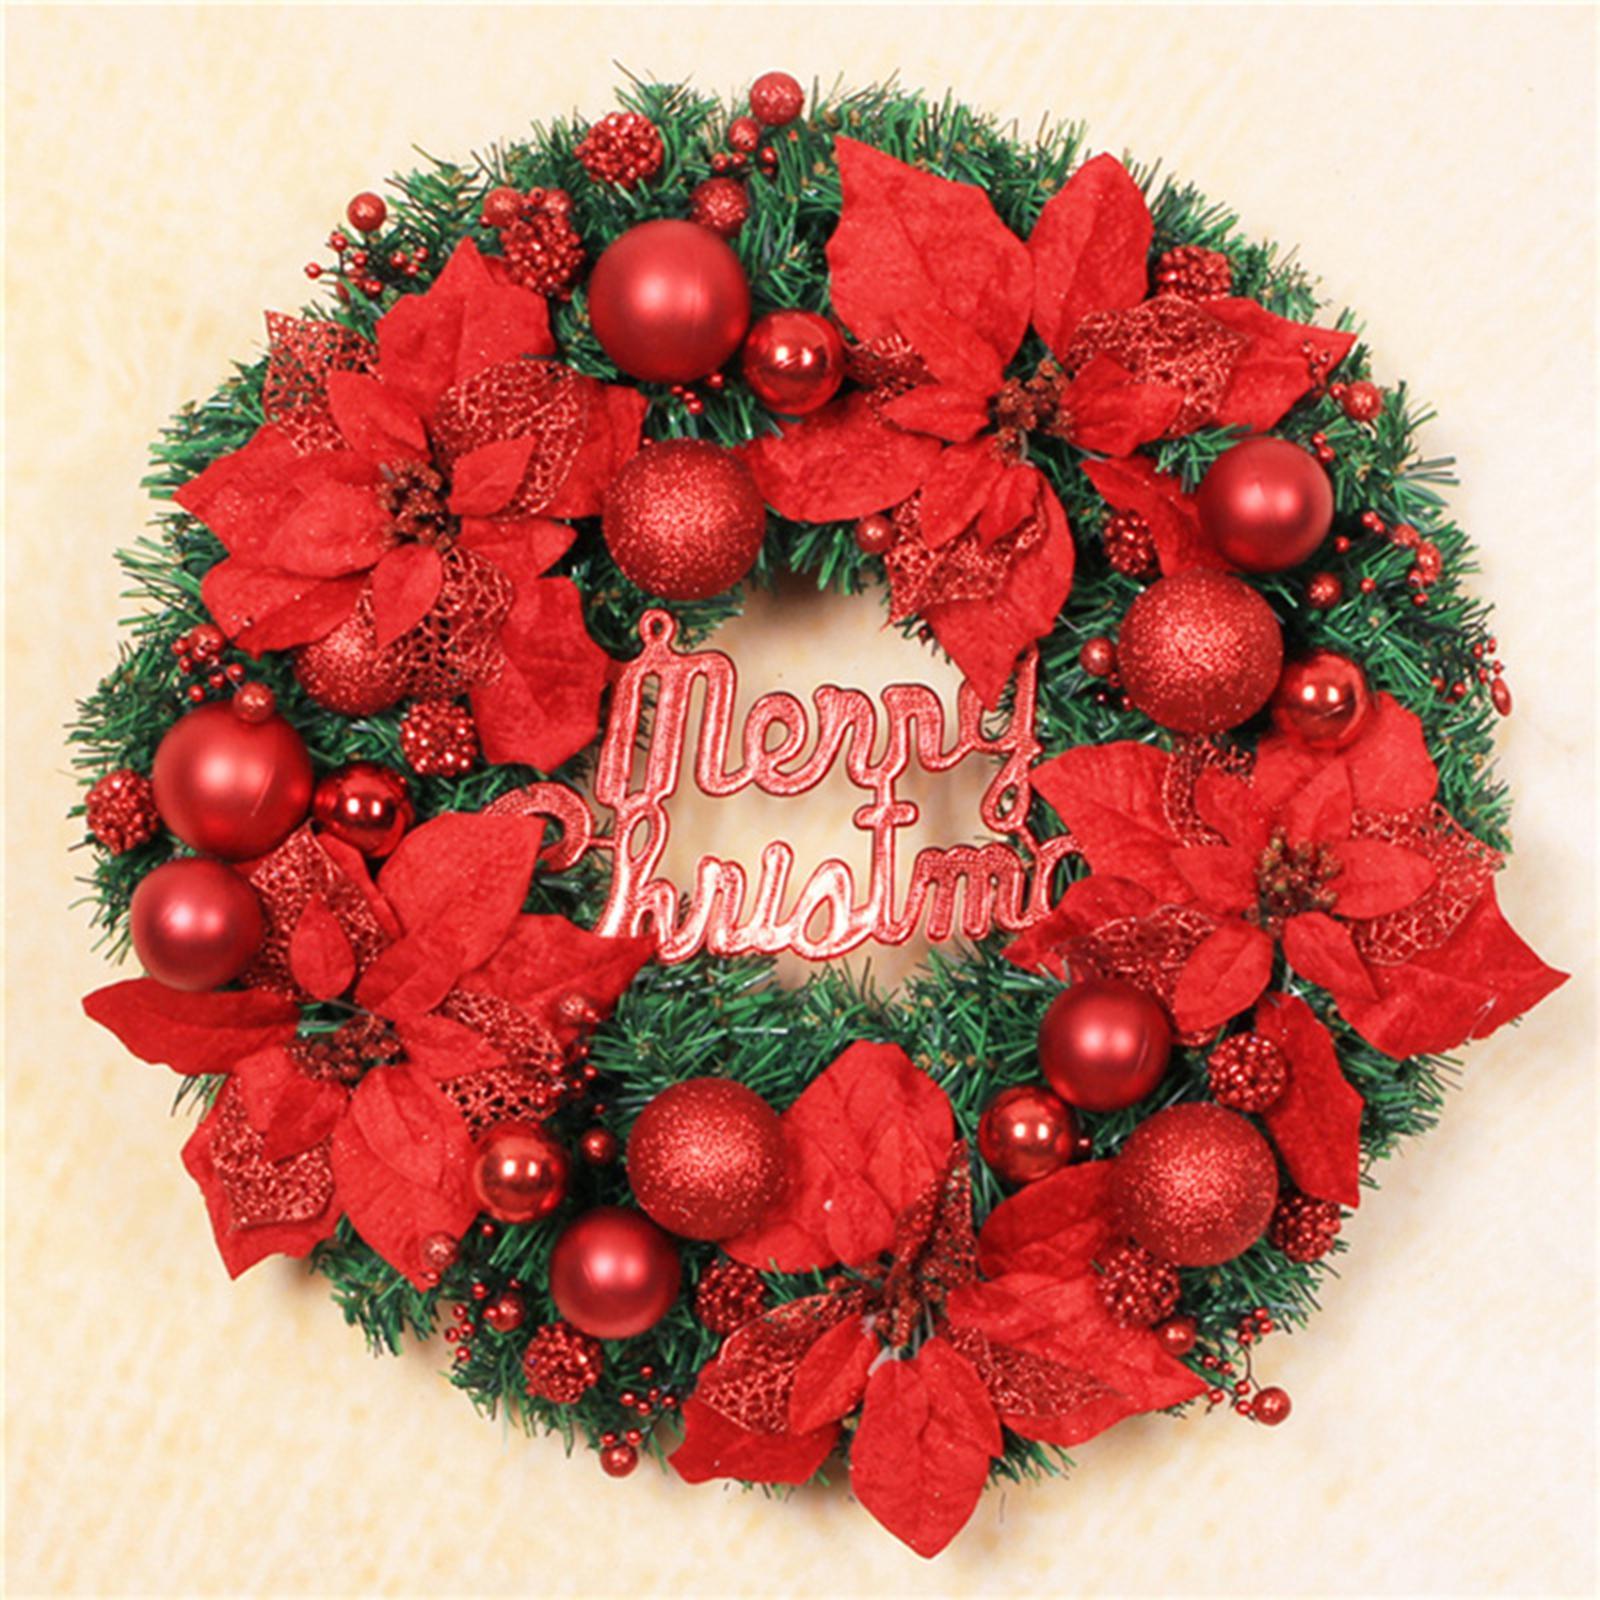 Christmas Door Wreath Green Leaves Wreaths Ball Ornament for Holiday